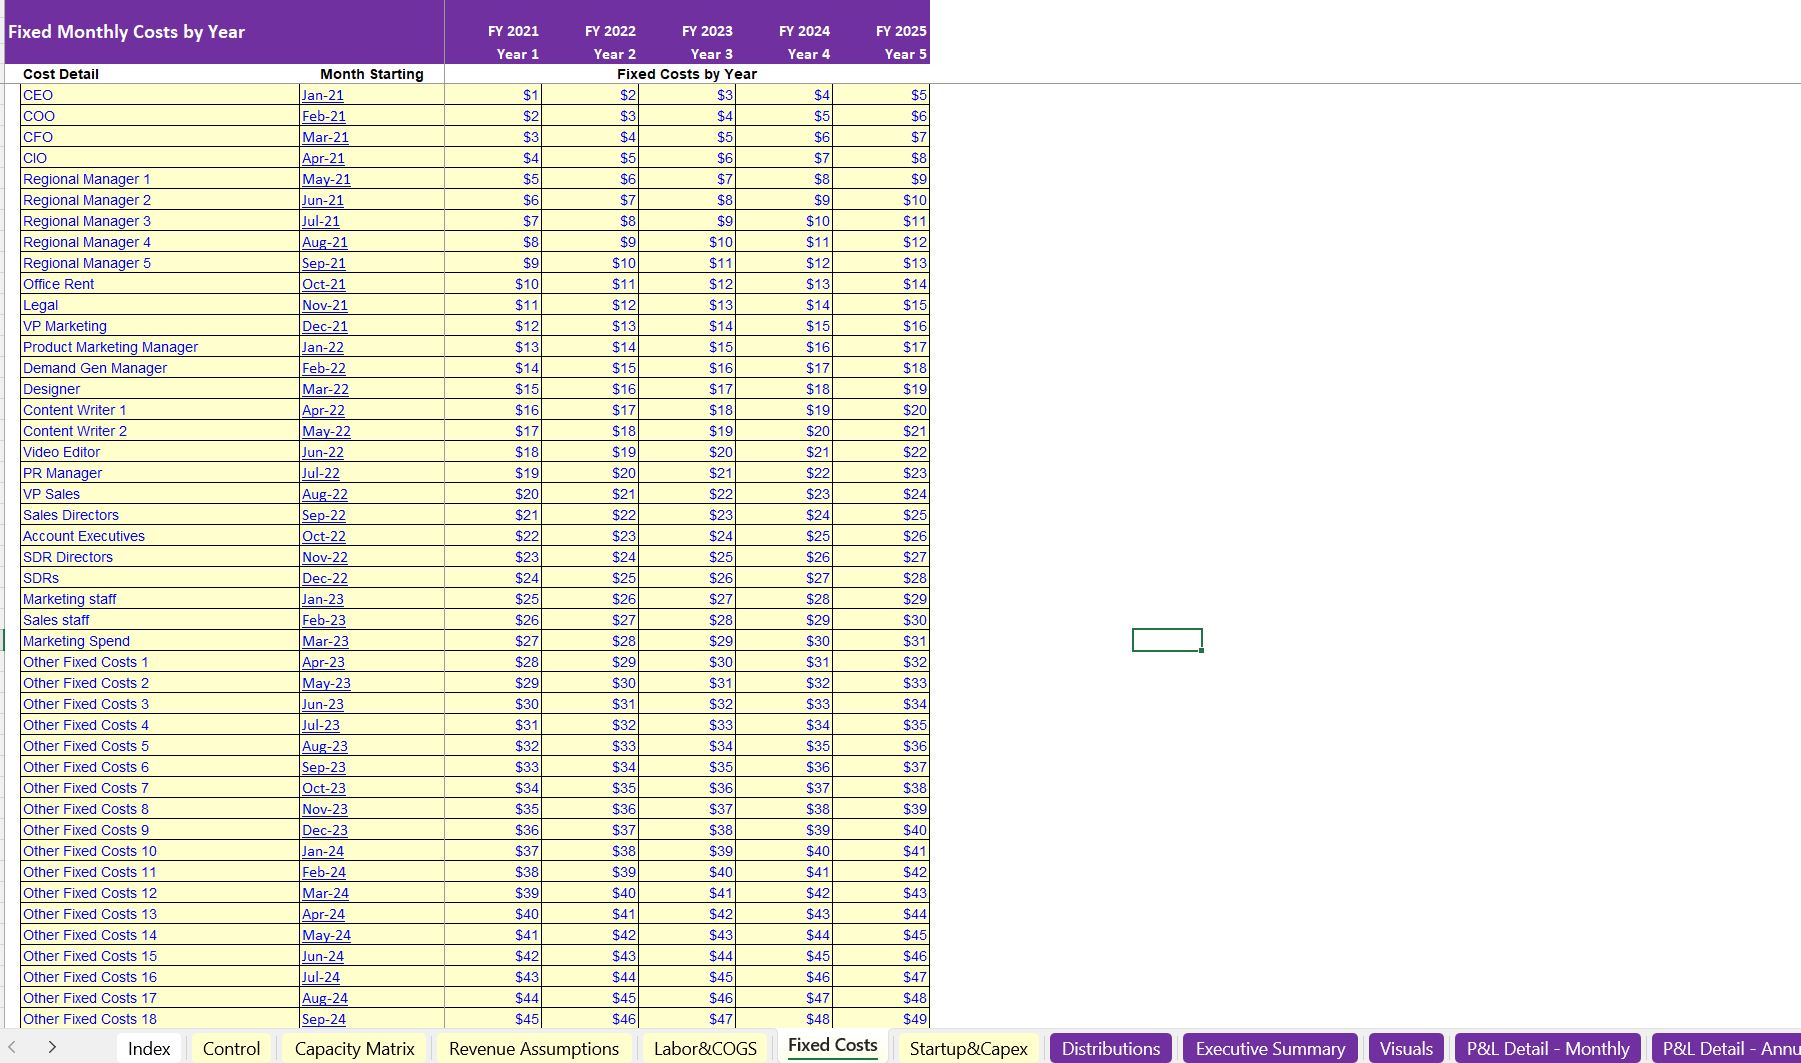 Scaling Up to 25 Retail Locations: Financial Model (Excel workbook (XLSX)) Preview Image